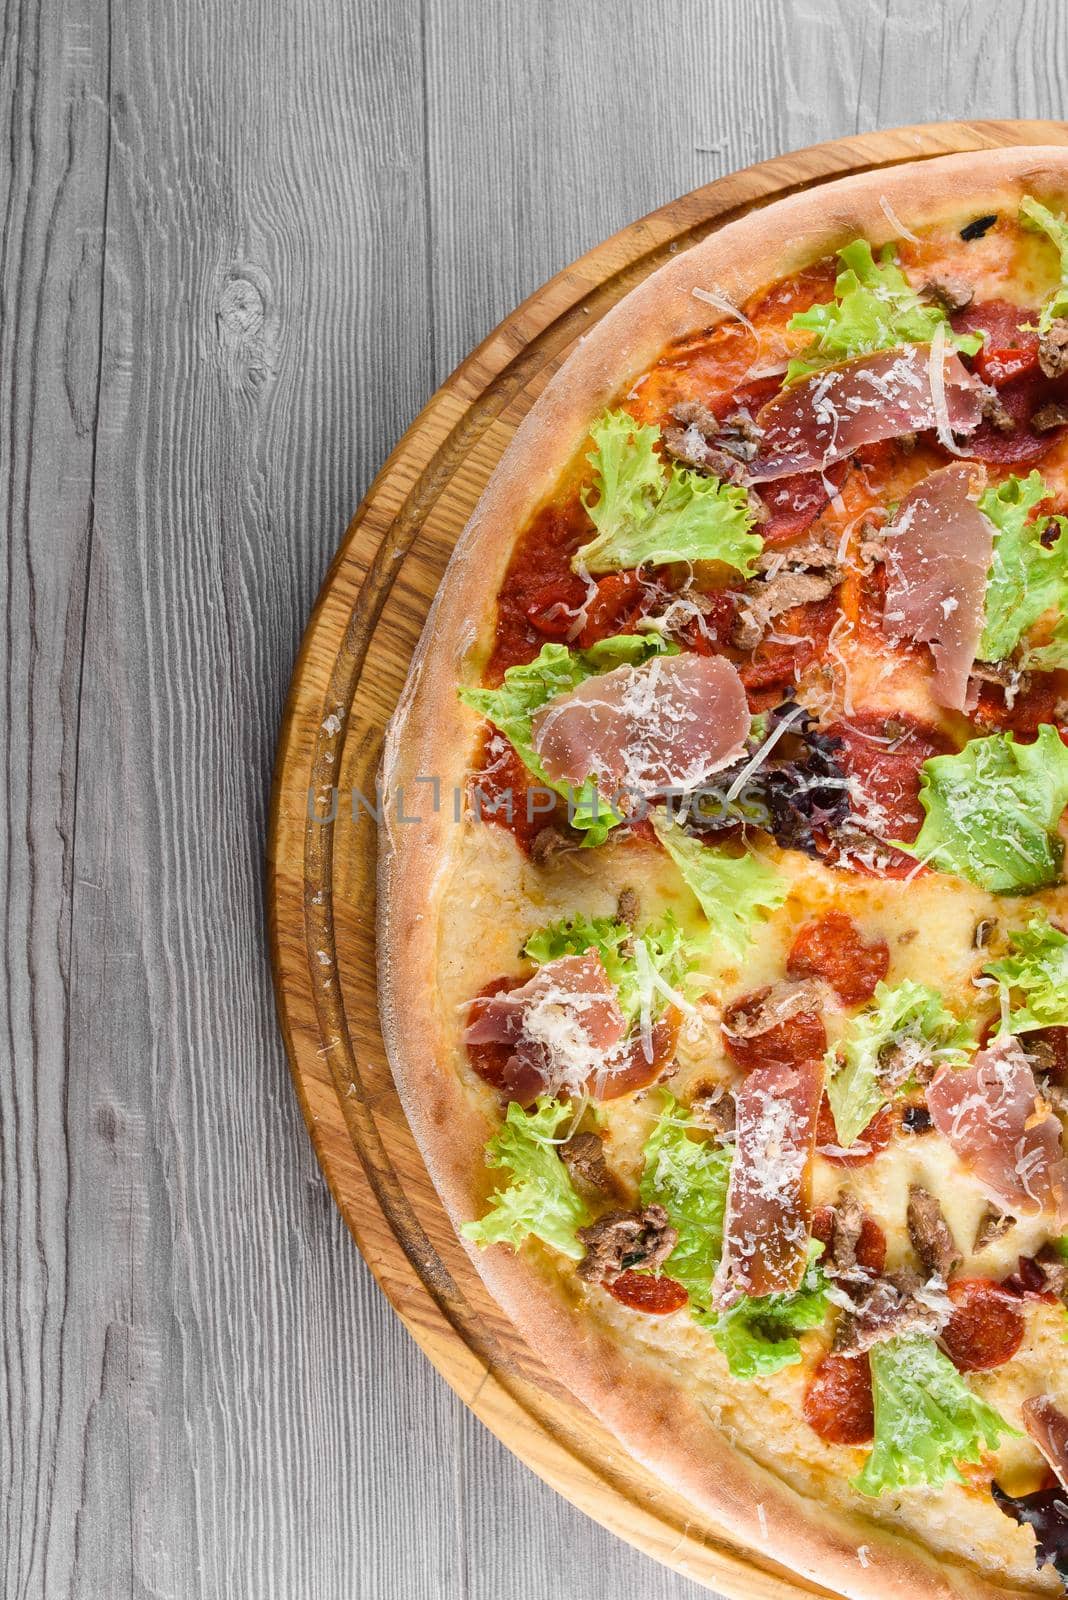 Delicious fresh italian pizza with ham, salami, tomatoes, salad and parmesan on a wooden board on a wooden table. Top view.